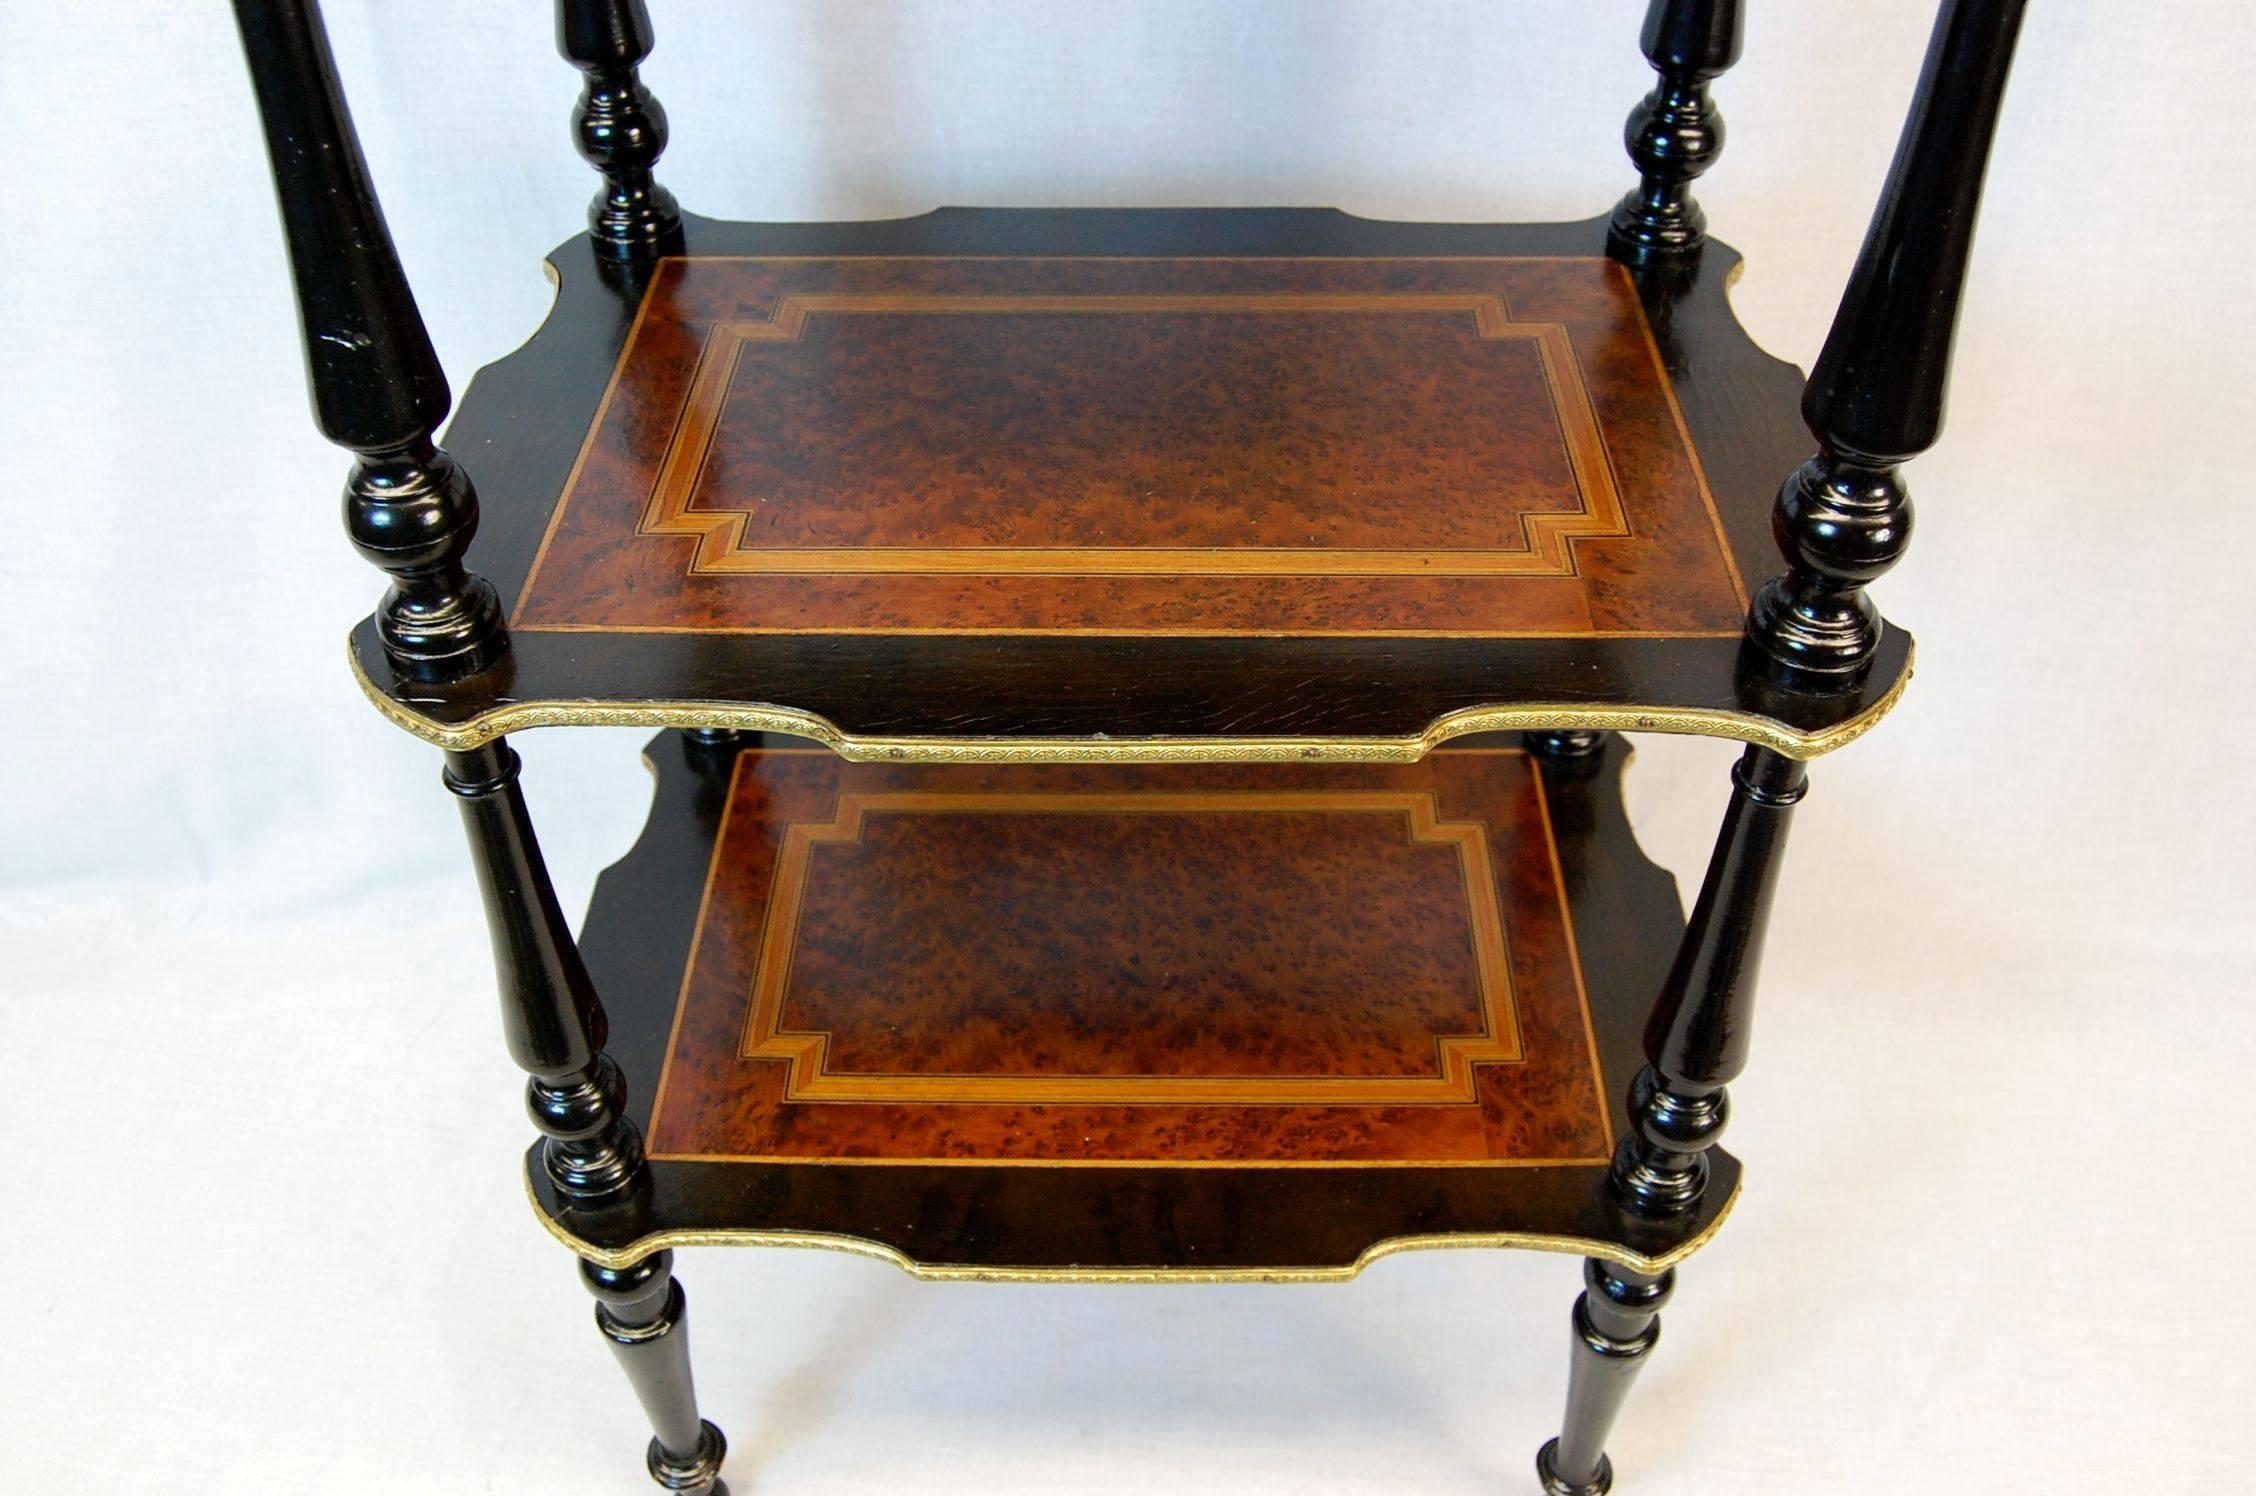 French Neoclassical Revival Three-Tier Side Table, circa 1870 For Sale 3